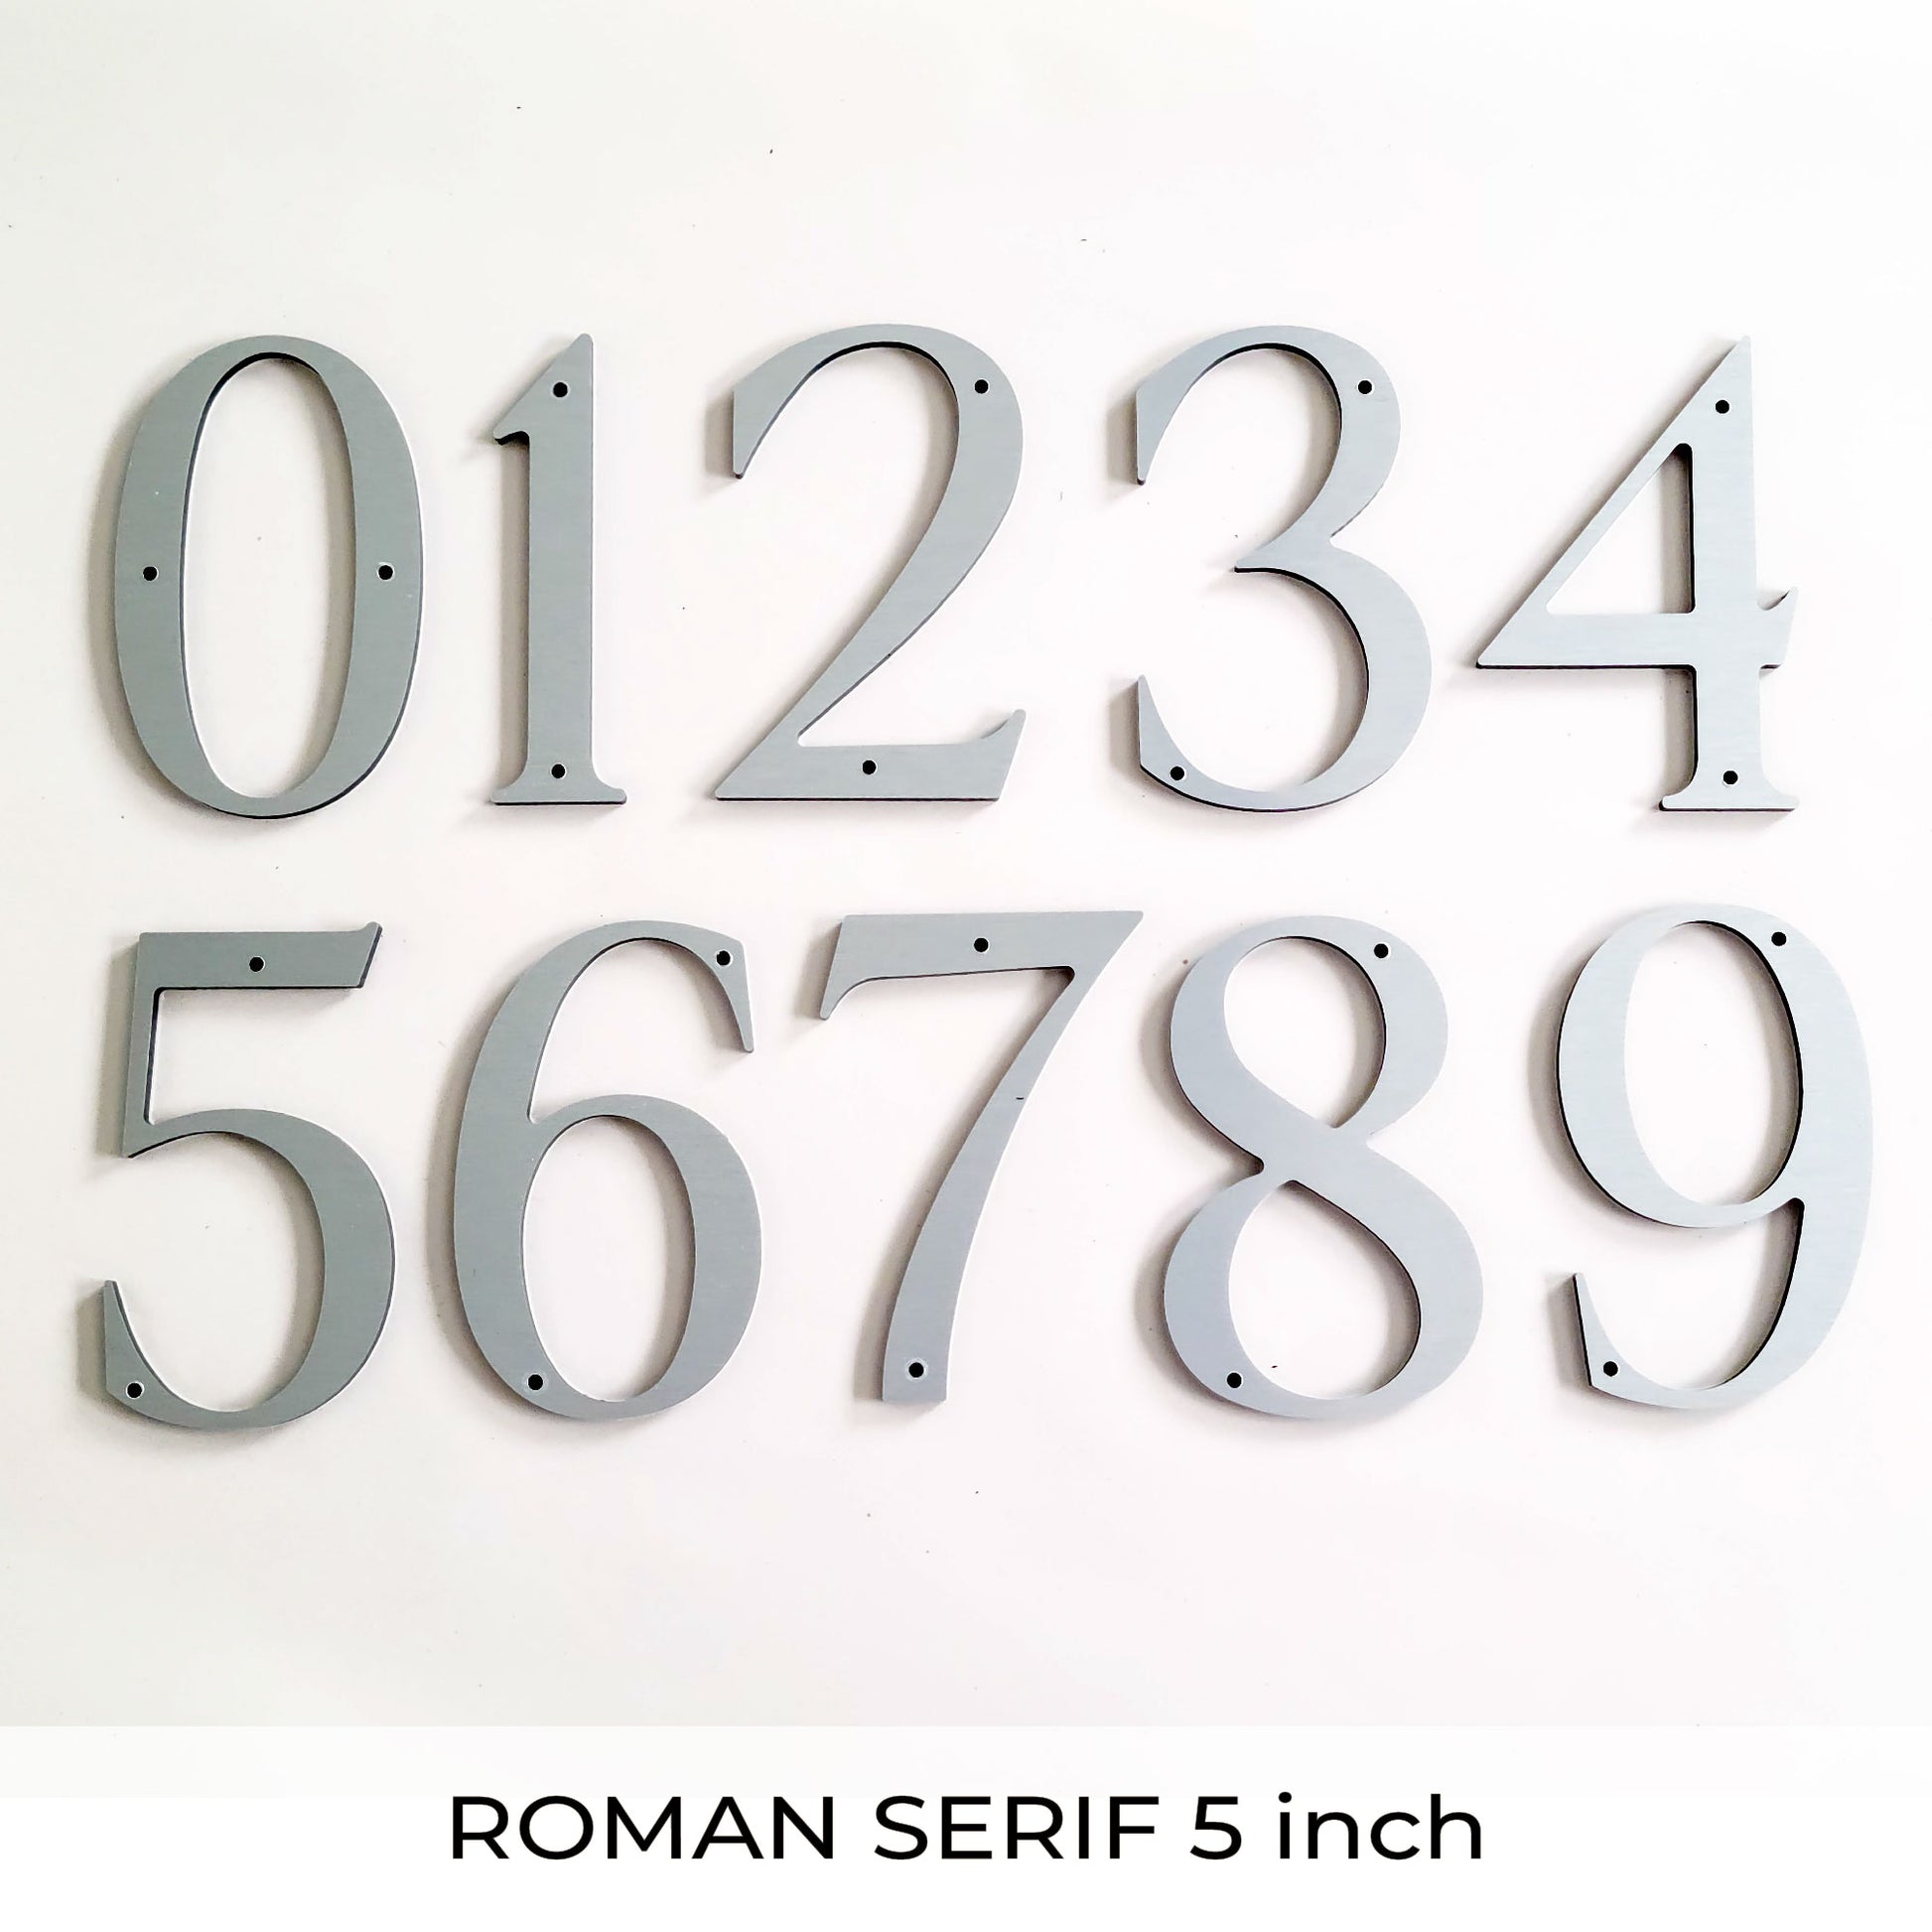 brushed silver ROMAN SERIF house numbers and letters 